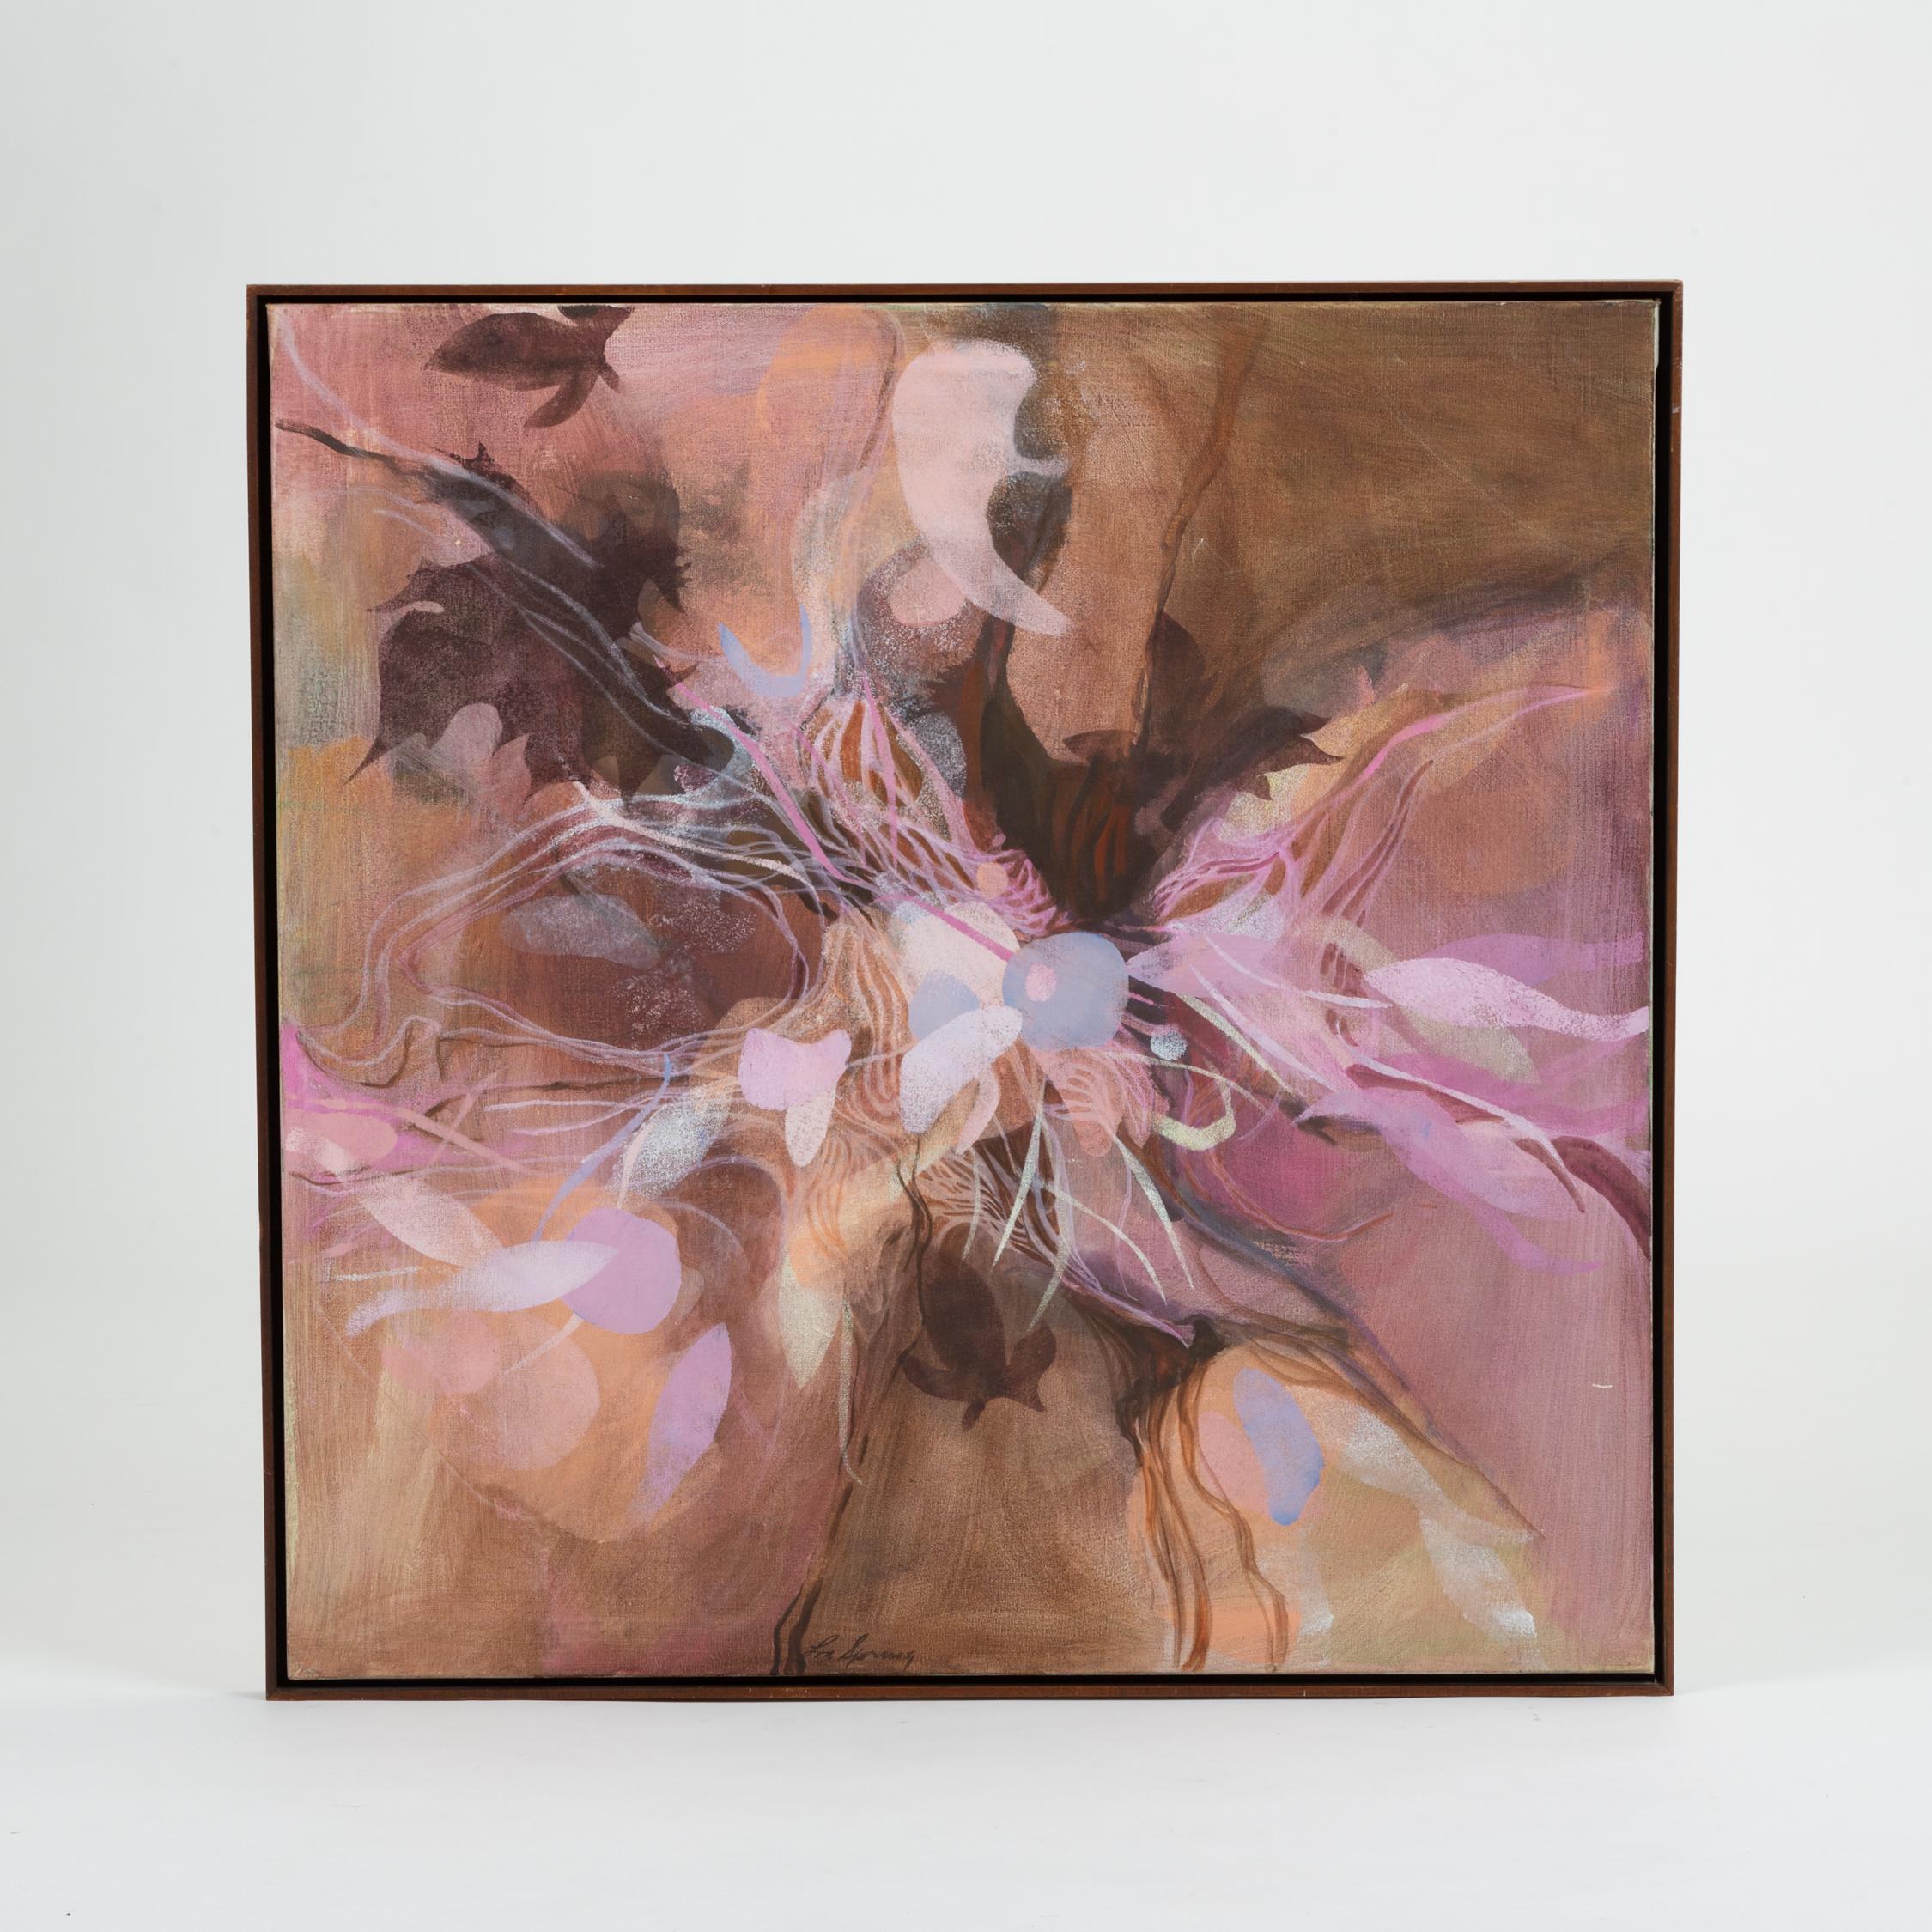 A framed oil painting on square canvas with an abstract pattern reminiscent of flowers. Fetchingly monochromatic, the image features wavy, petal-shaped constructions in a color palette of mauves and lilacs. The canvas appears to float in a slightly